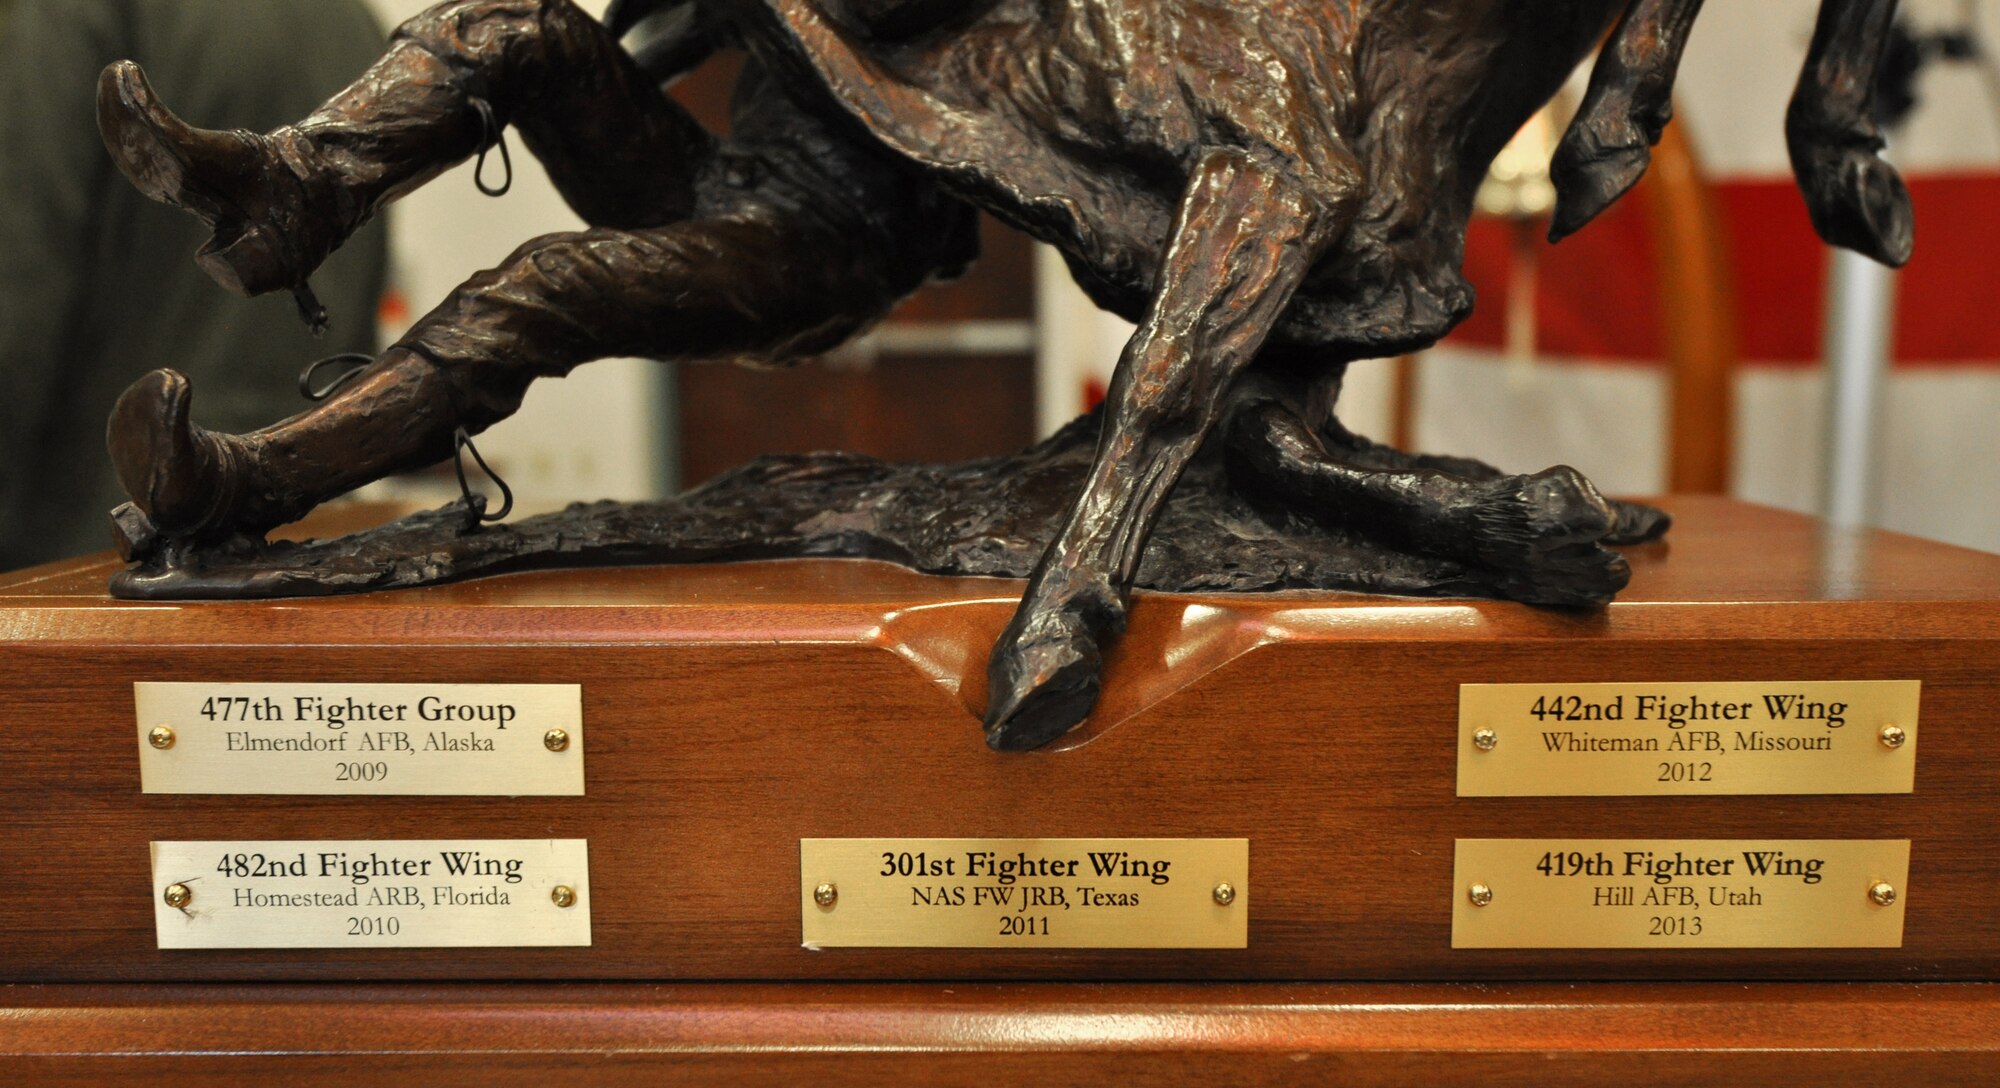 The 10th Air Force Power and Vigilance trophy was presented to the 419th Fighter Wing, Hill Air Force Base, Utah, in a ceremony recently at the Naval Air Station Fort Worth Joint Reserve Base, Texas. The 419 FW was recently proclaimed the premier unit within 10th Air Force, winning trophy bragging rights for the year. The Power and Vigilance Award is presented annually to the 10 AF Reserve unit that exhibits the NAF mission as "the premier provider of affordable, integrated, flexible, and mission-ready Citizen Airmen to execute power and vigilance missions in support of U.S. National Security.” The symbolism of the bronze figure on the award says it all, ‘grabbing the bull by the horns’.  They are only the fifth unit to hold this honor. (U.S. Air Force photo/Master Sgt. Julie Briden-Garcia)